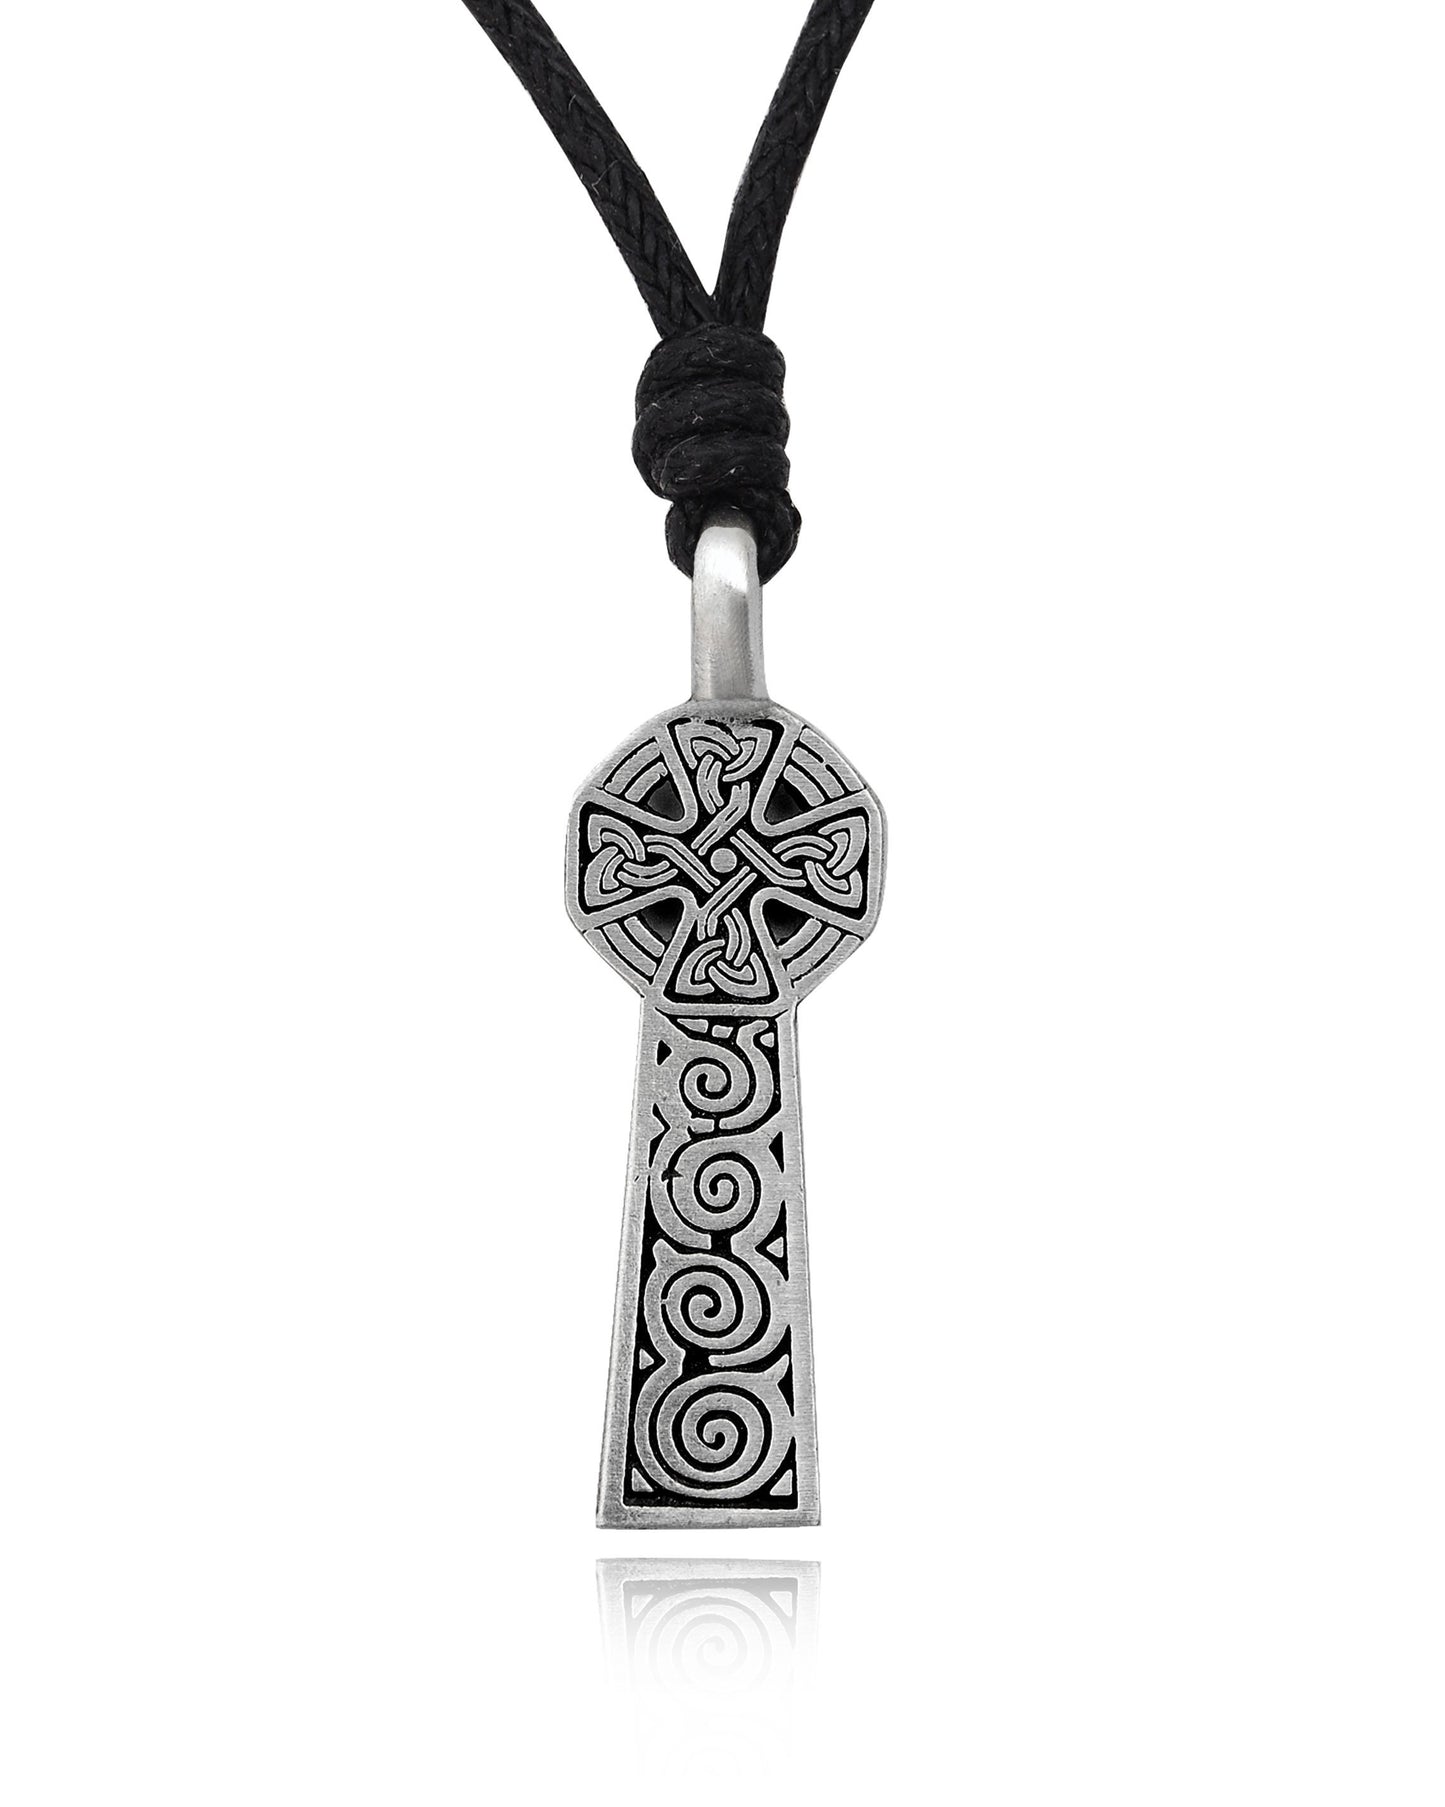 Beautiful Celtic Cross Silver Pewter Charm Necklace Pendant Jewelry